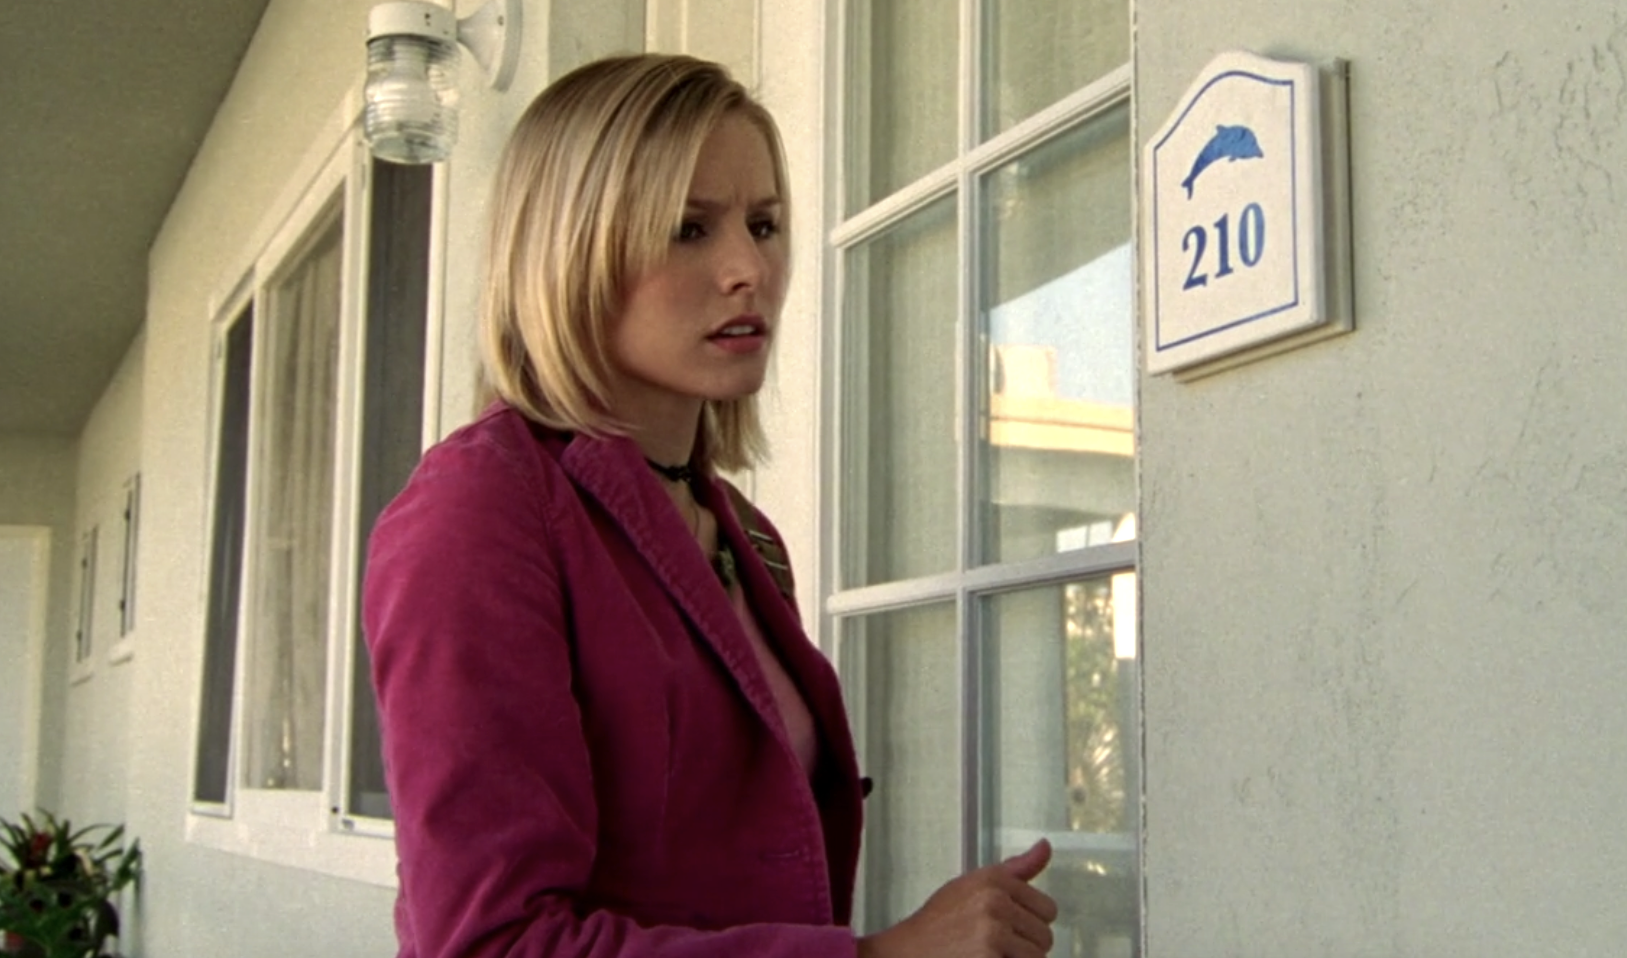 Screenshot of S1E7 of Veroncia Mars. Veronica is wearing a pink blazer and is standing outside the door of an apartment with a nameplate that reads "210" with an image of a dolphin. Her hand is in a fist by the door as if she has just knocked or is about to.